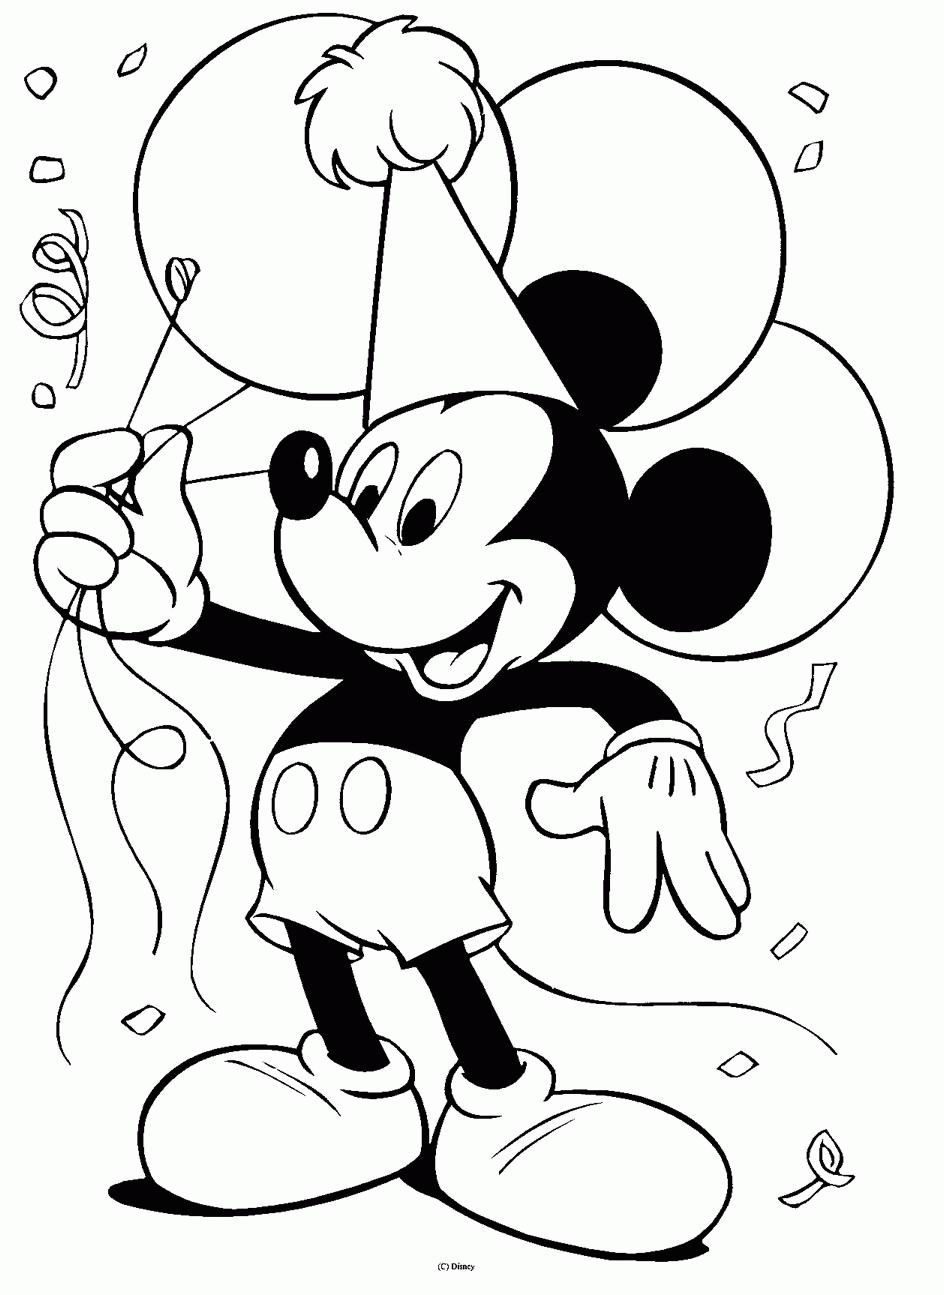 Disney Coloring Book
 Ultimate pictures mix Disney coloring pages